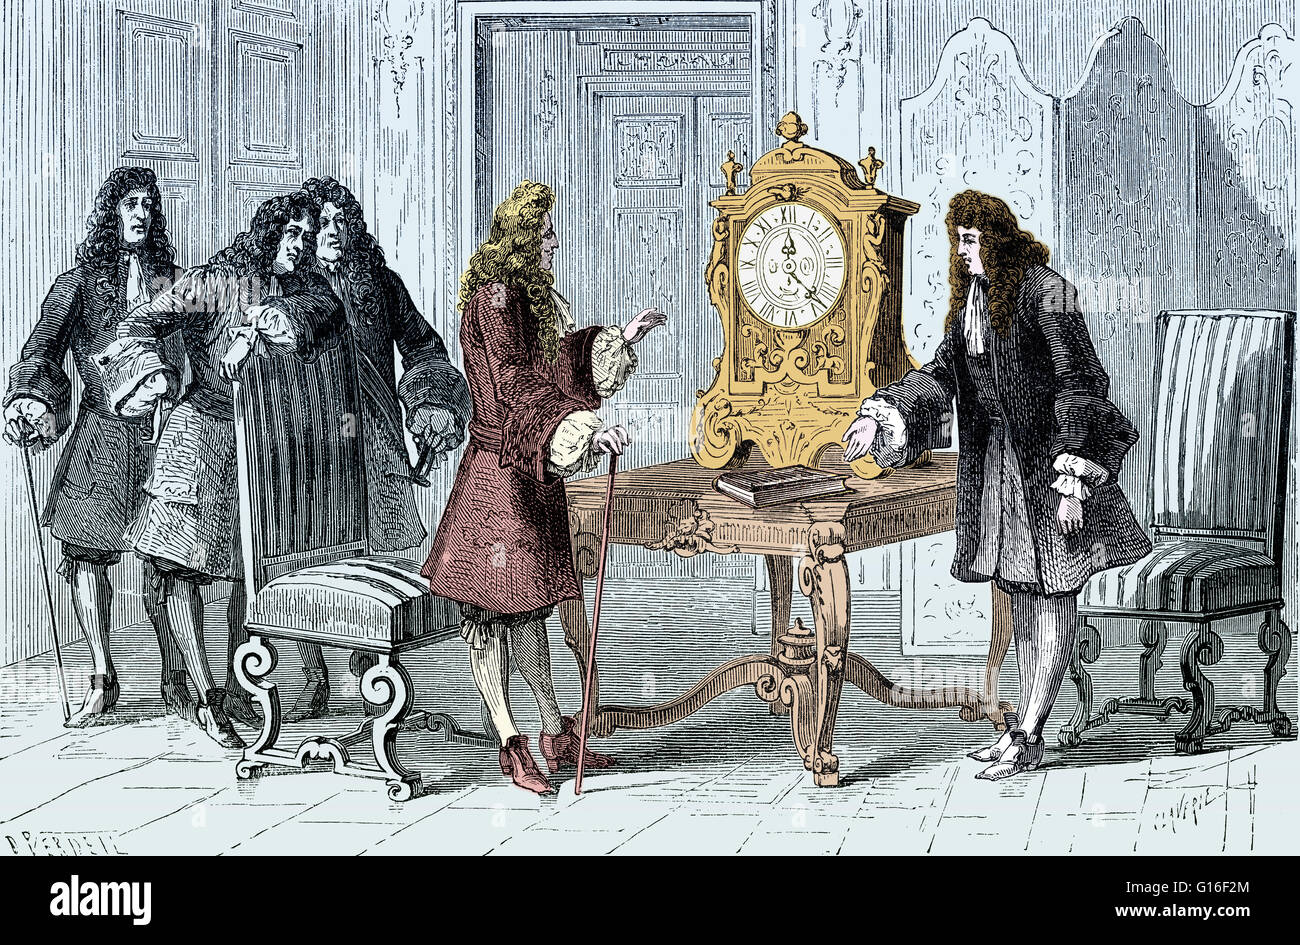 Huygens presents his pendulum clock to Louis XIV. Christiaan Huygens (April 14, 1629 - July 8, 1695) was a prominent Dutch mathematician, astronomer, physicist, probabilist, horologist and scientist. Huygens is remembered especially for his wave theory of Stock Photo